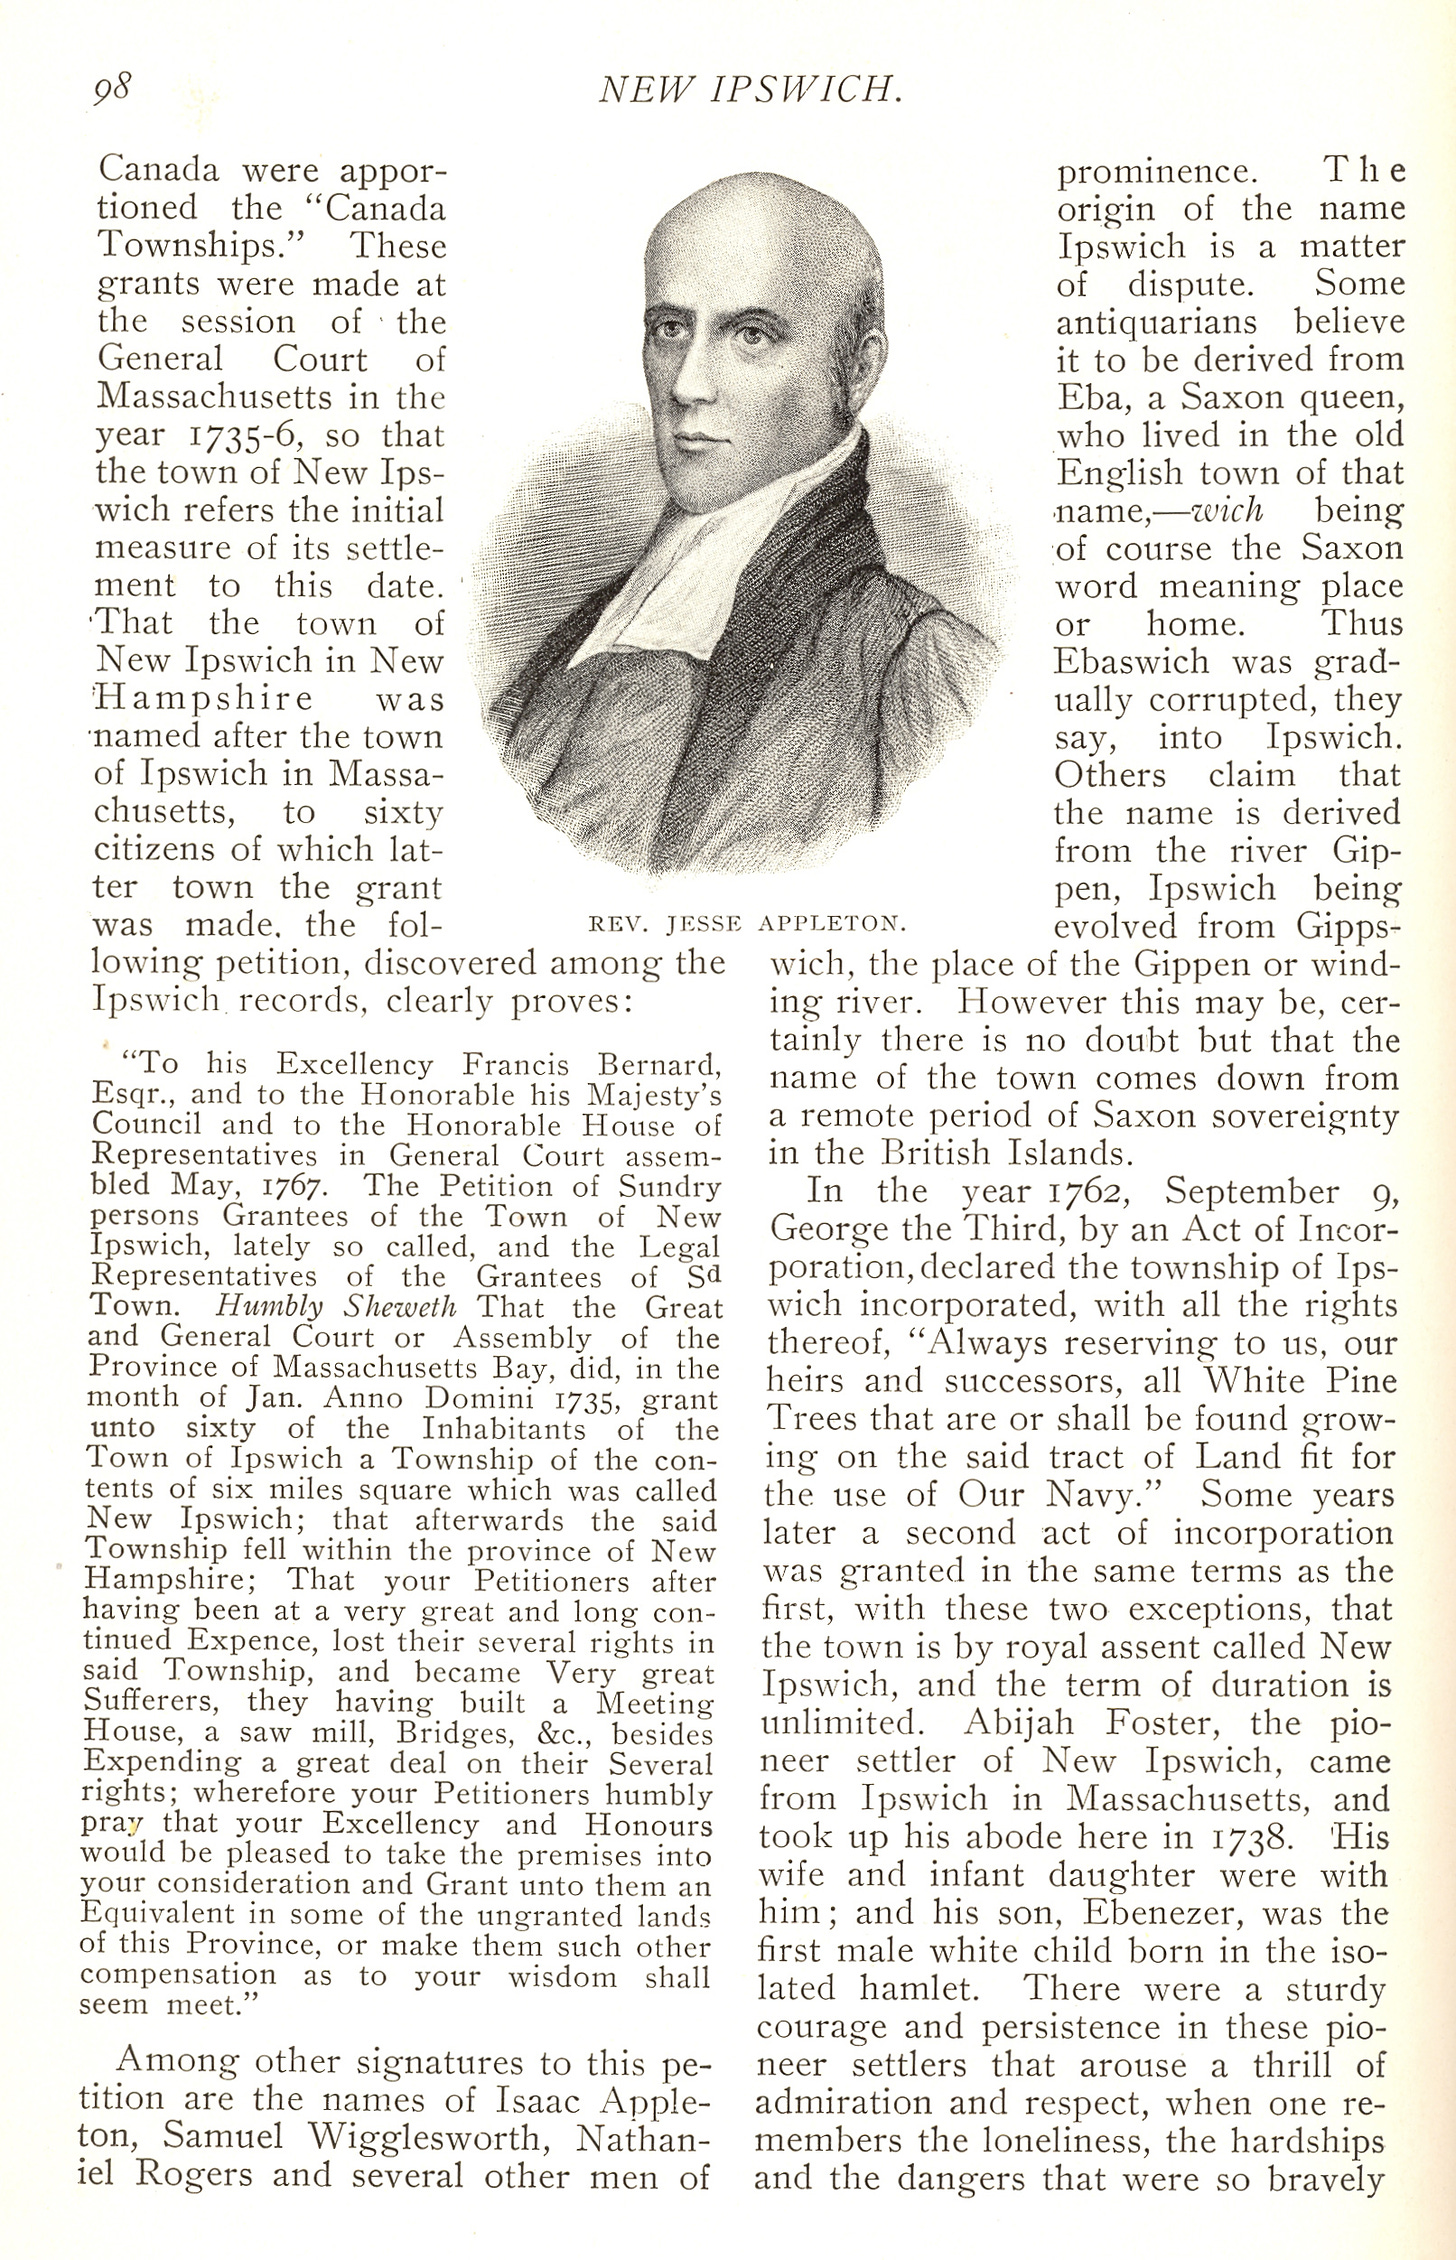 New England Magazine - March 1900 - page 98